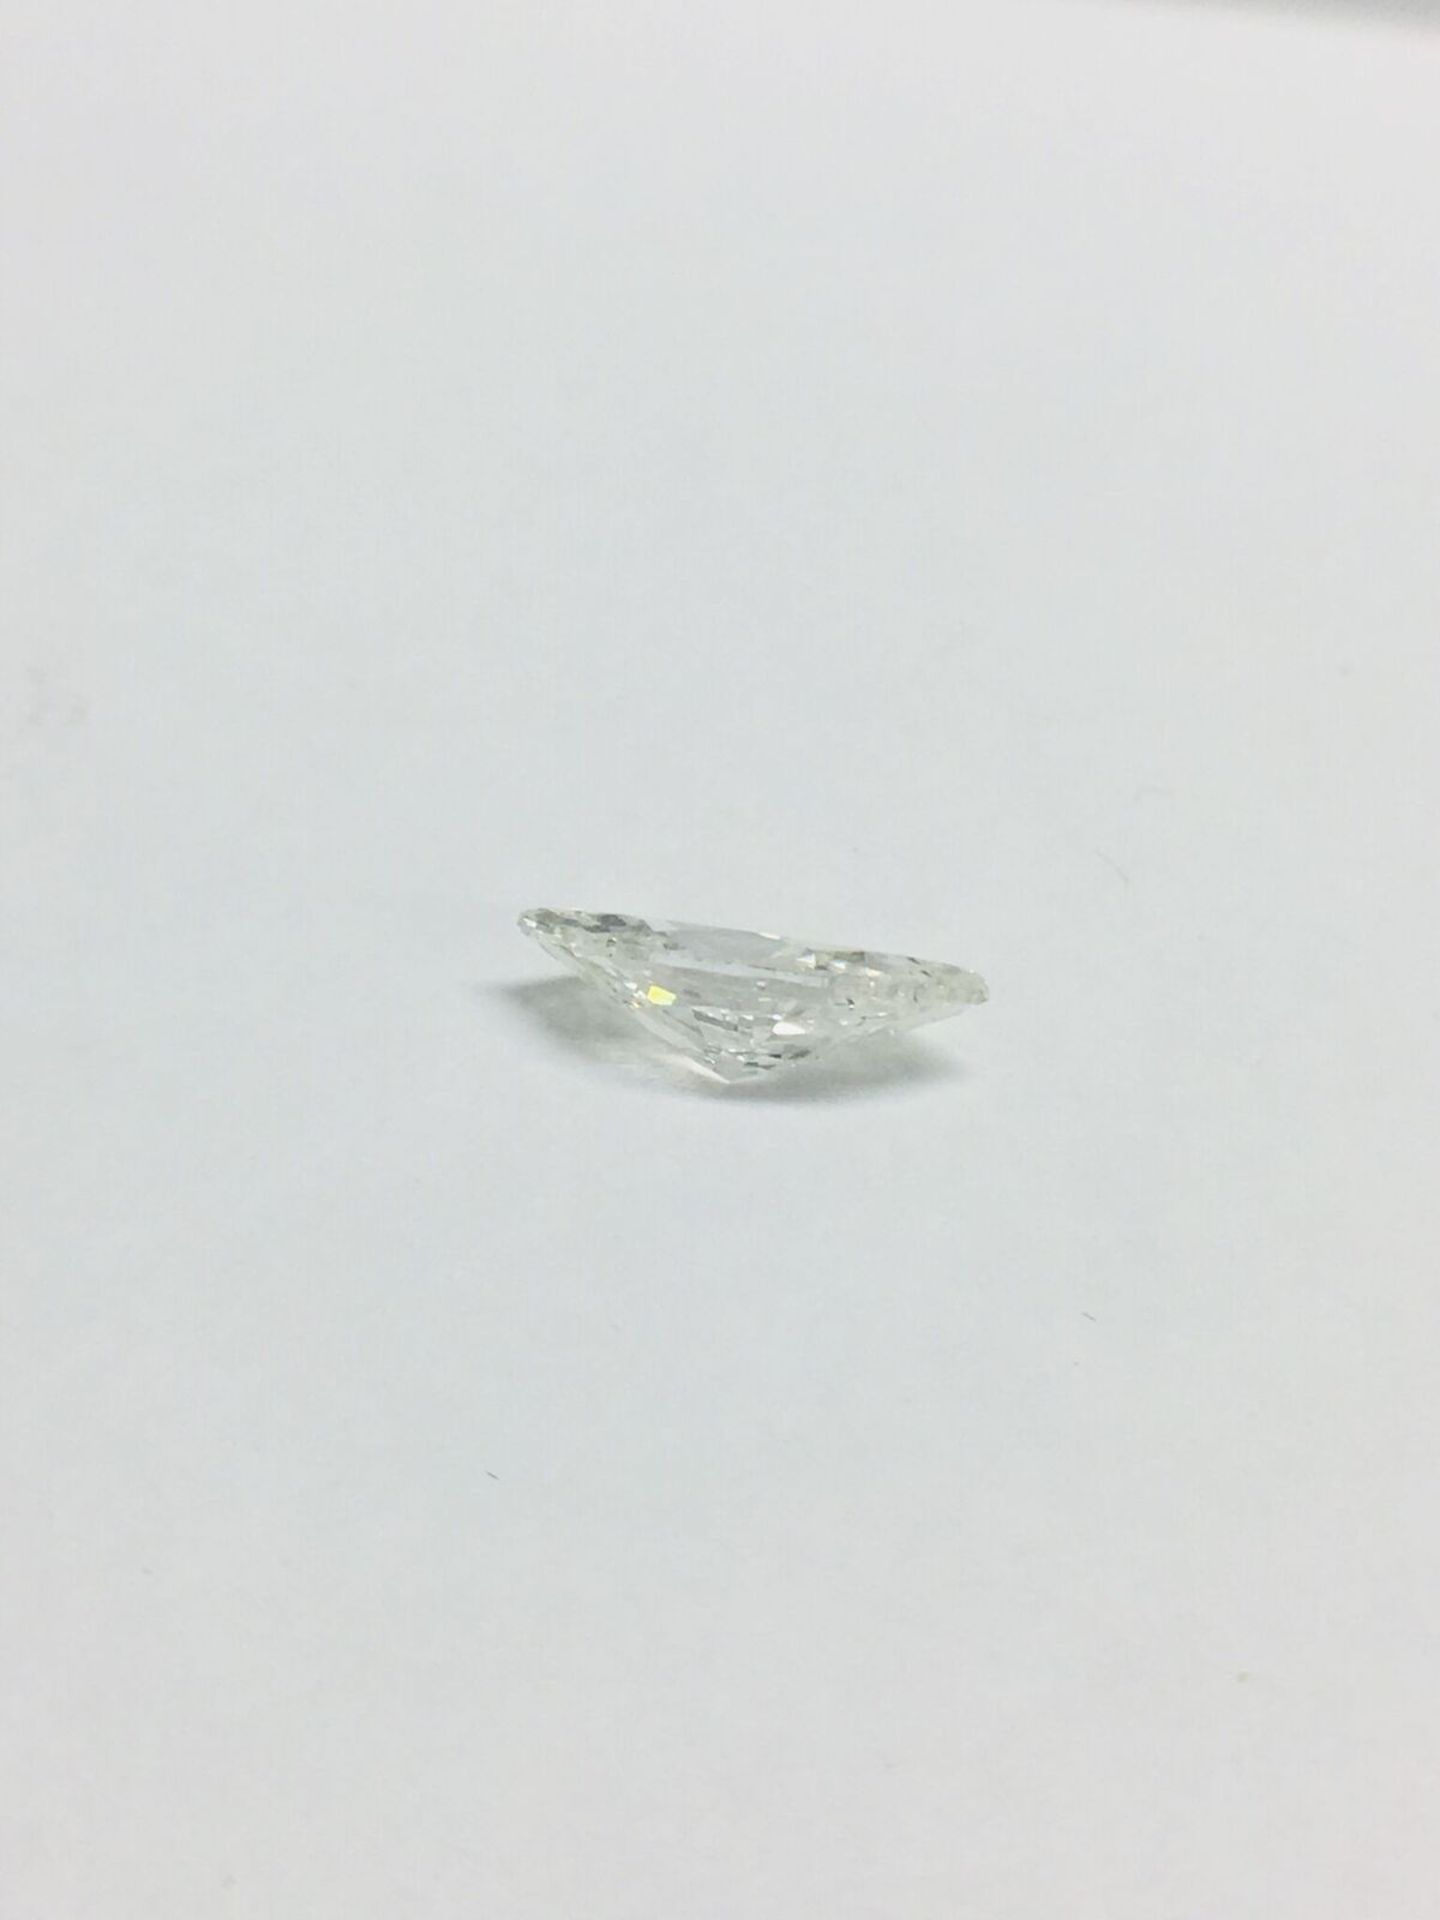 1.23ct Marquis Cut Natural Diamond - Image 5 of 5